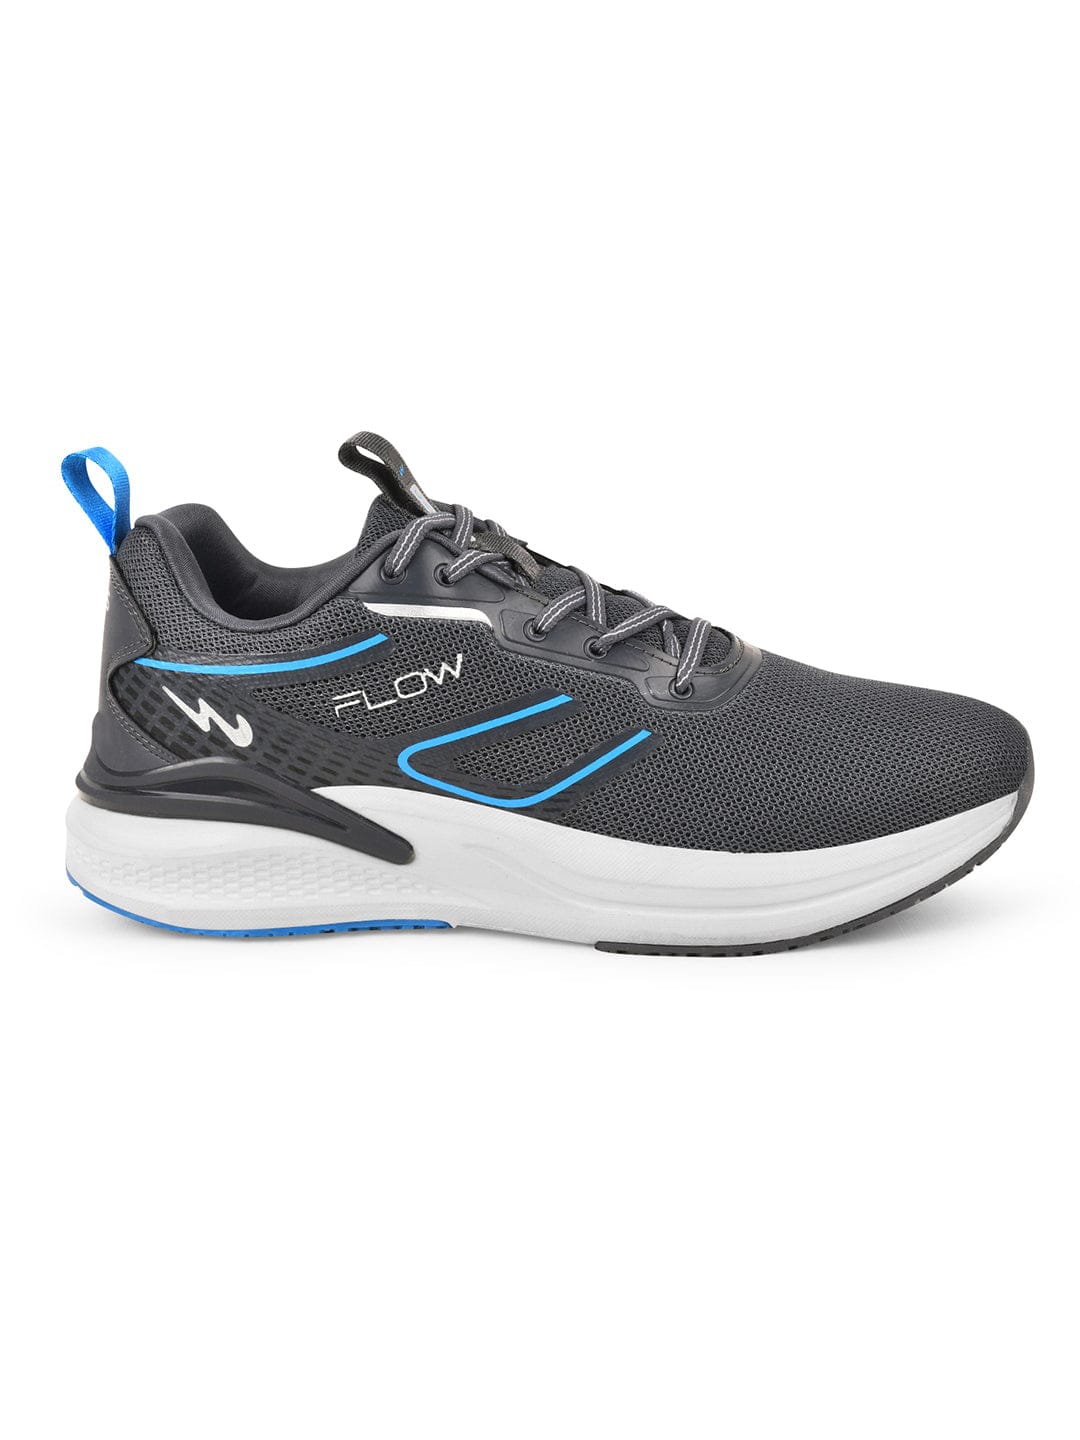 Buy Running Shoes For Child: Flow-Ch-L-Gry-T-Blu | Campus Shoes